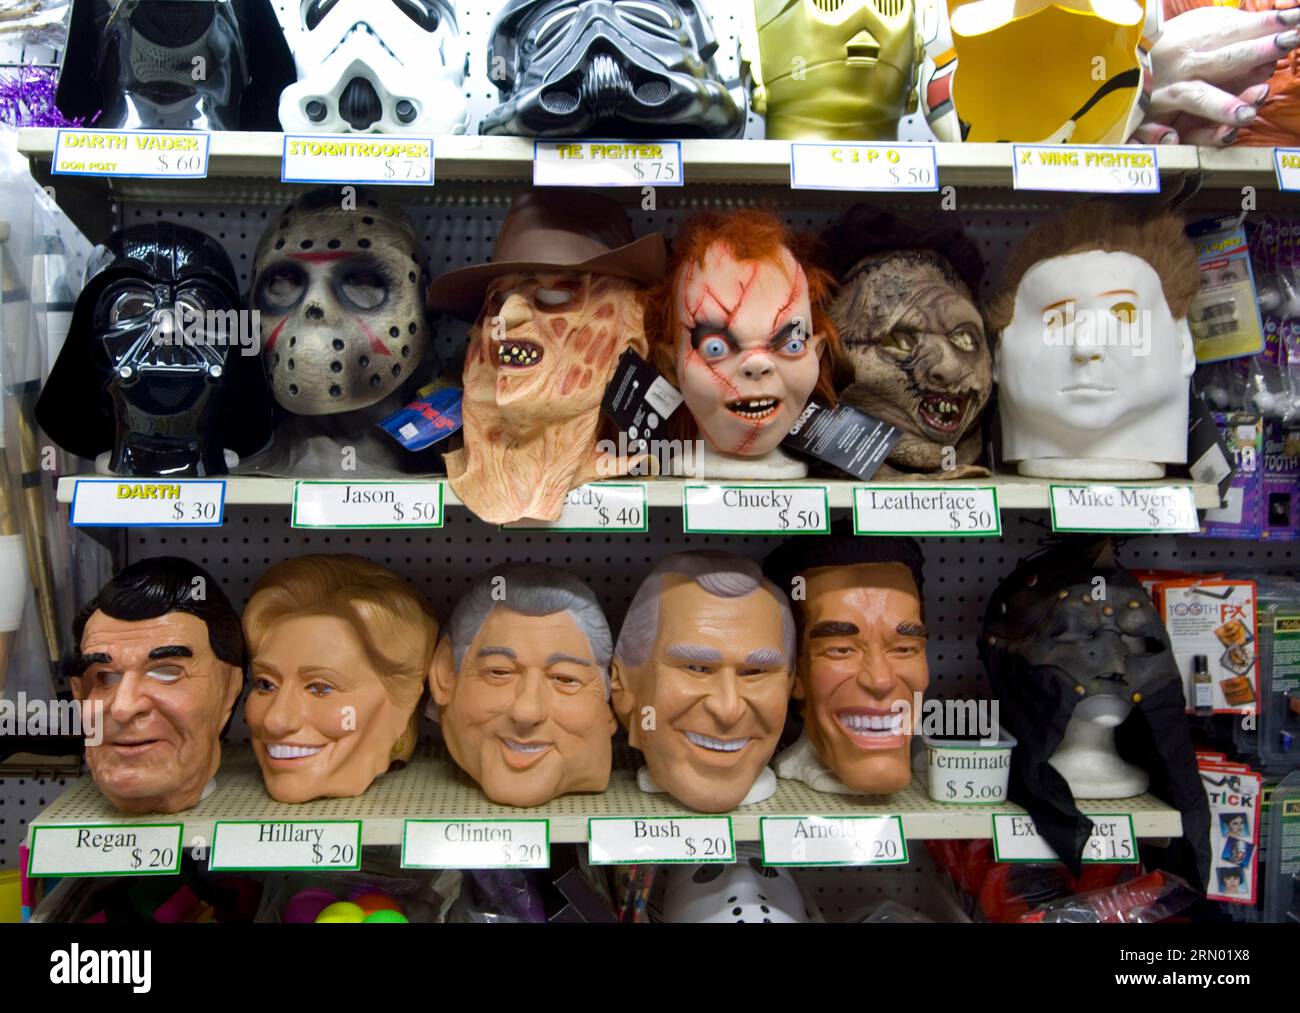 Halloween masks on display in a shop on Hollywood Blvd. include monsters and US politicians, circa 1980s, Los Angeles, California, USA Stock Photo